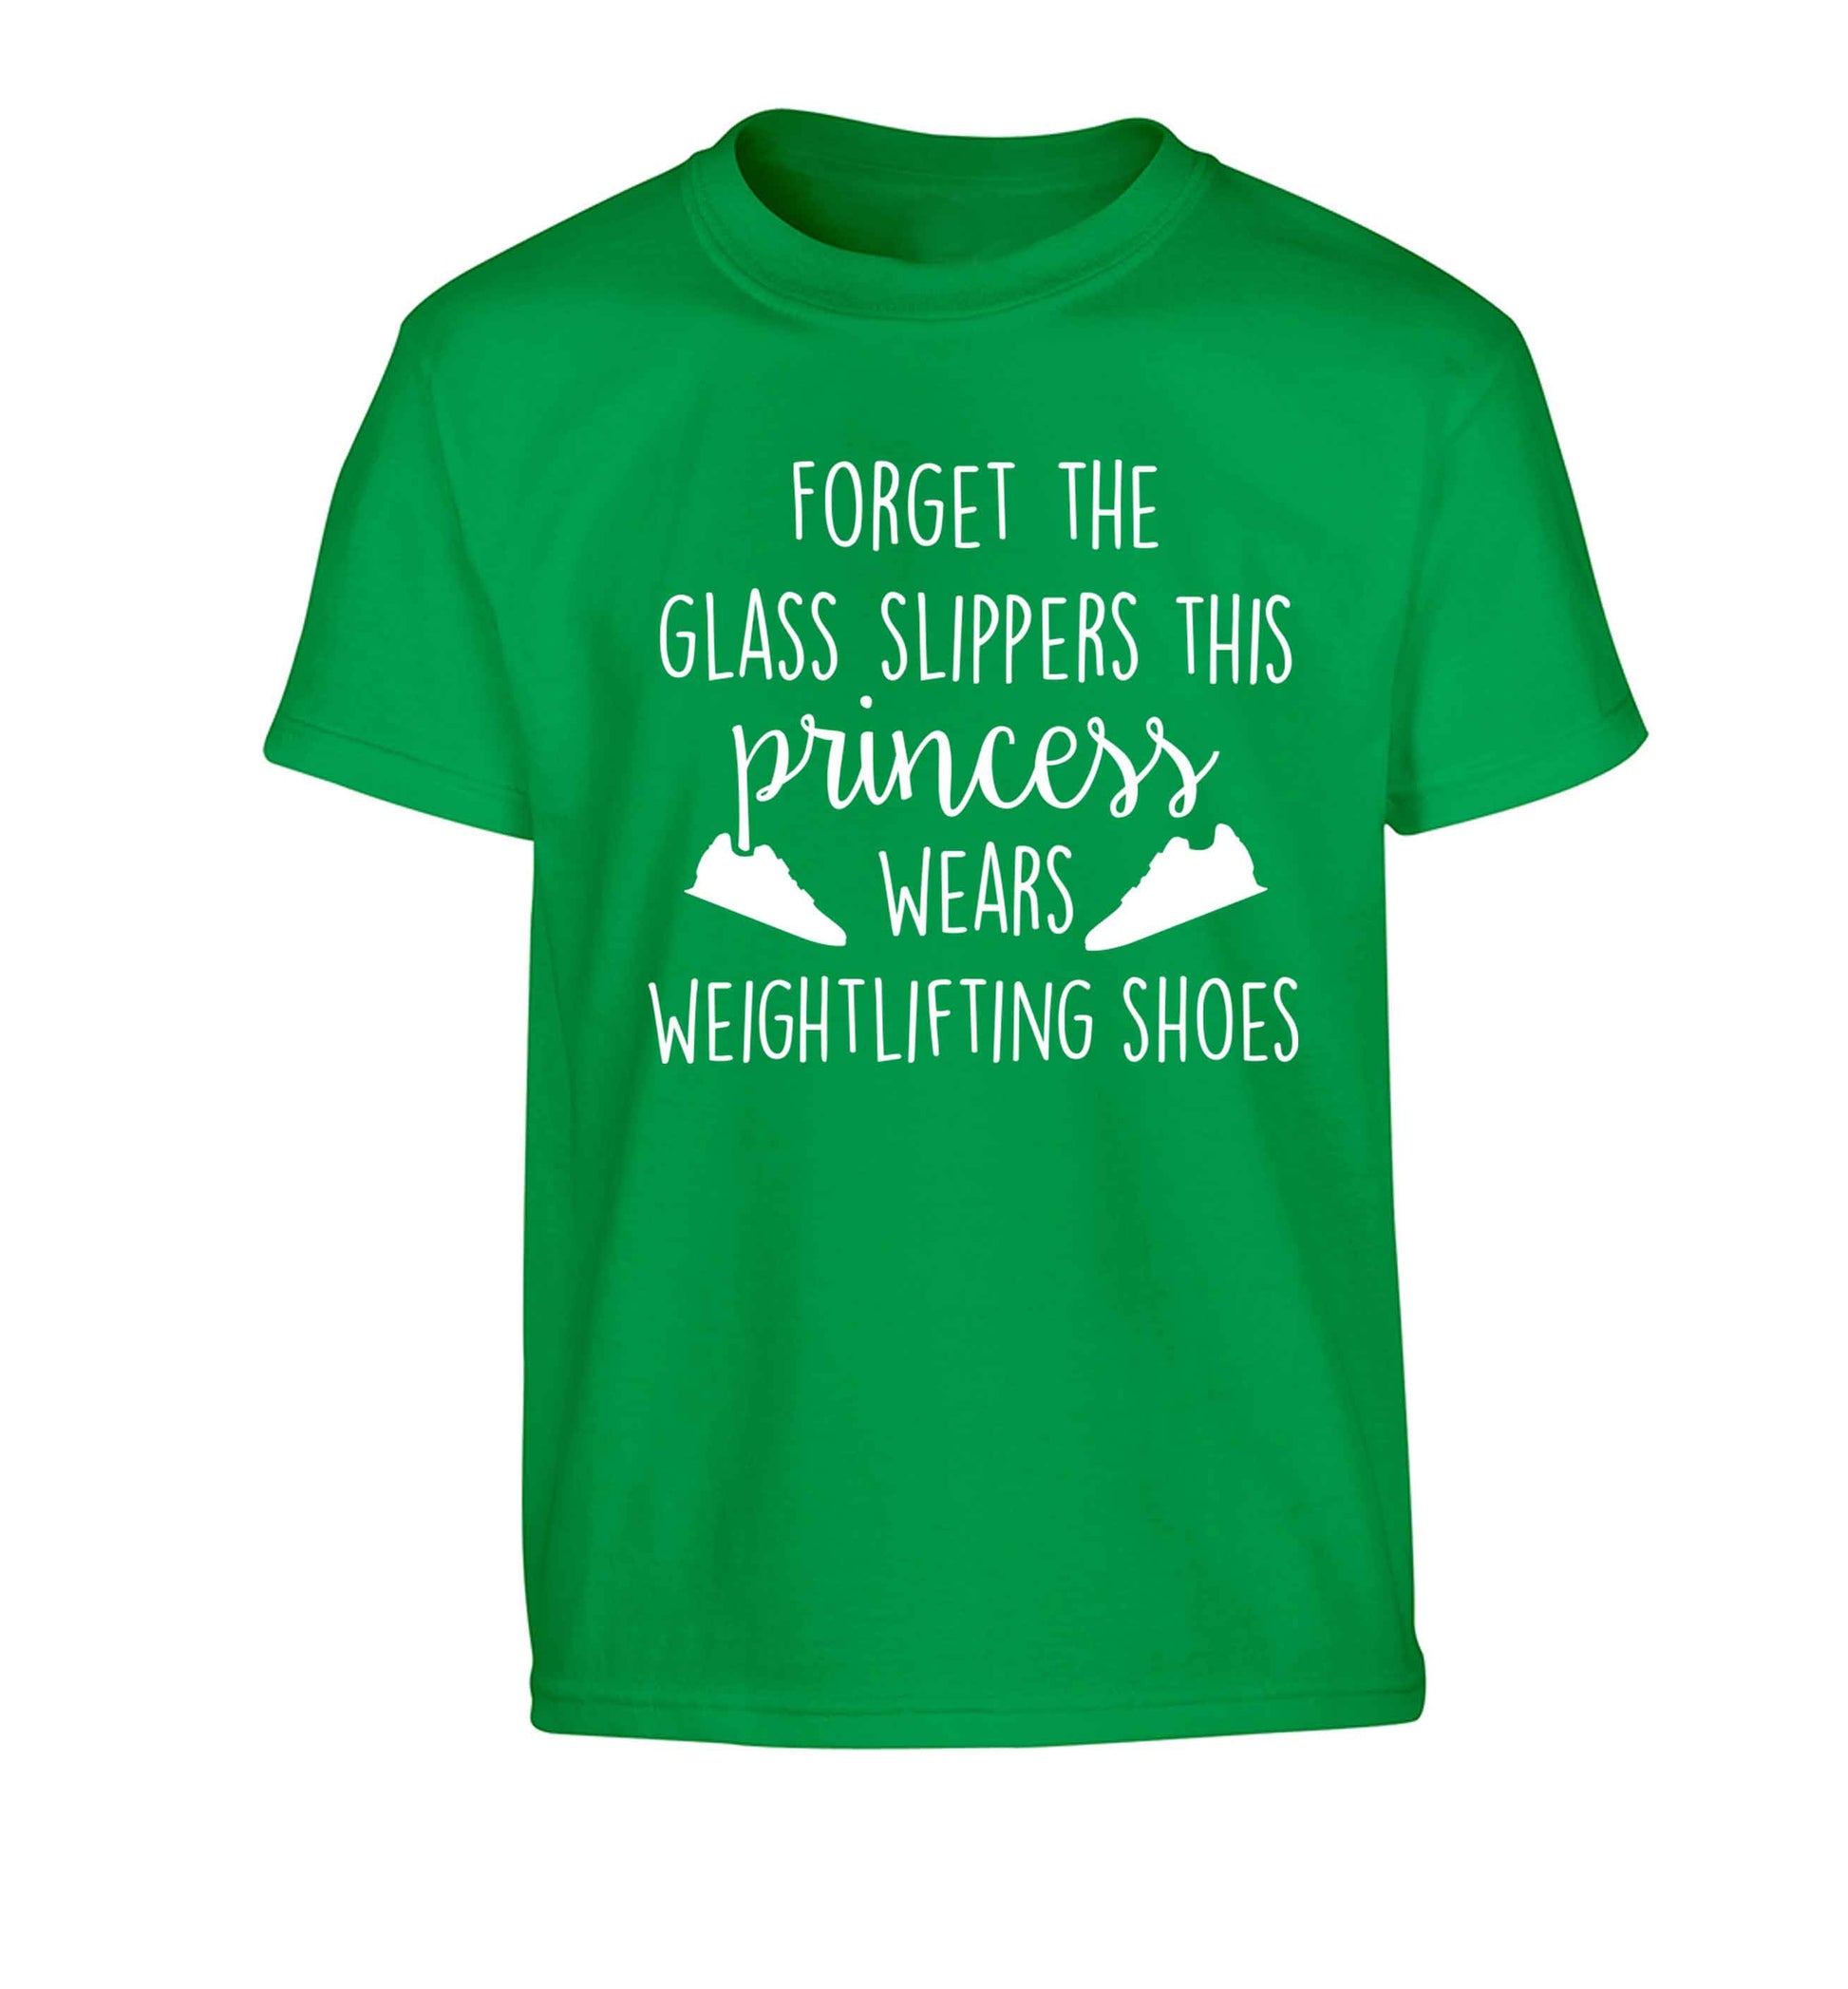 Forget the glass slippers this princess wears weightlifting shoes Children's green Tshirt 12-13 Years